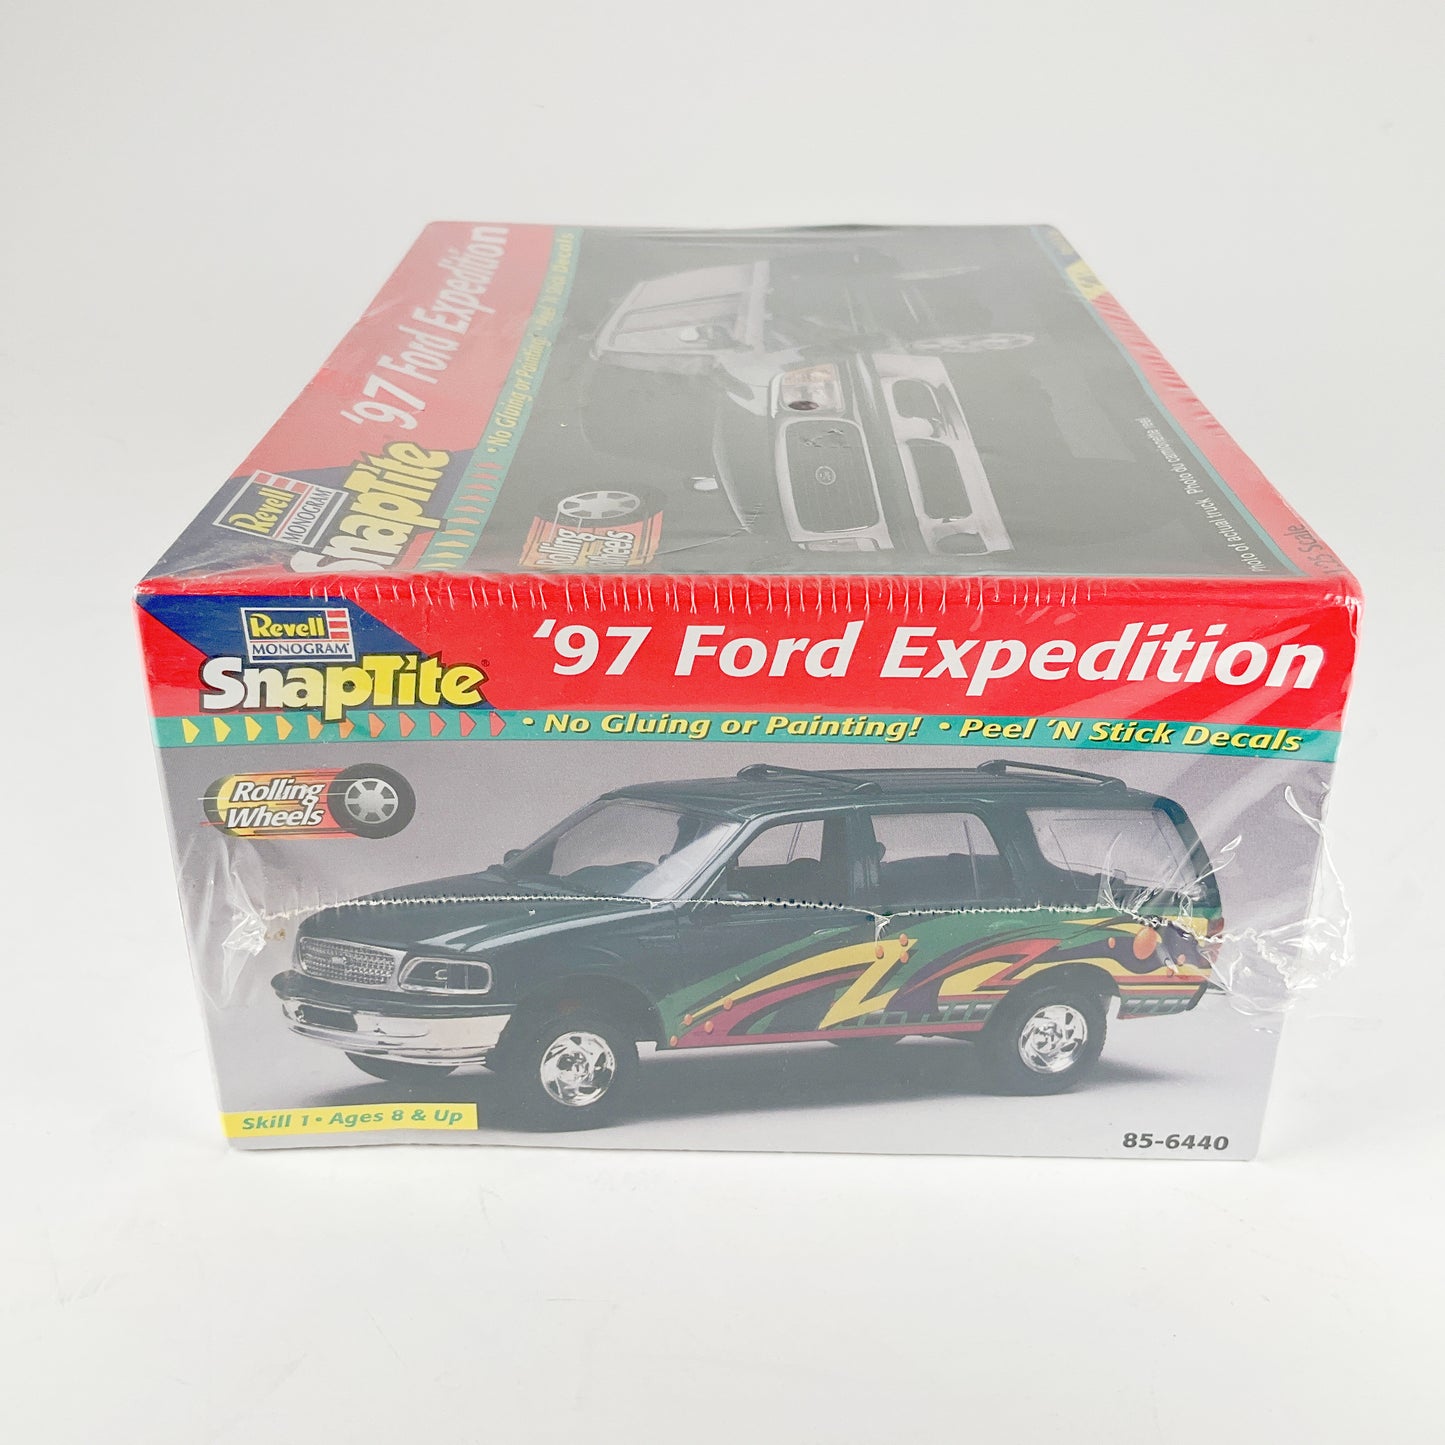 Revell Monogram - Snaptite 97 Ford Expedition